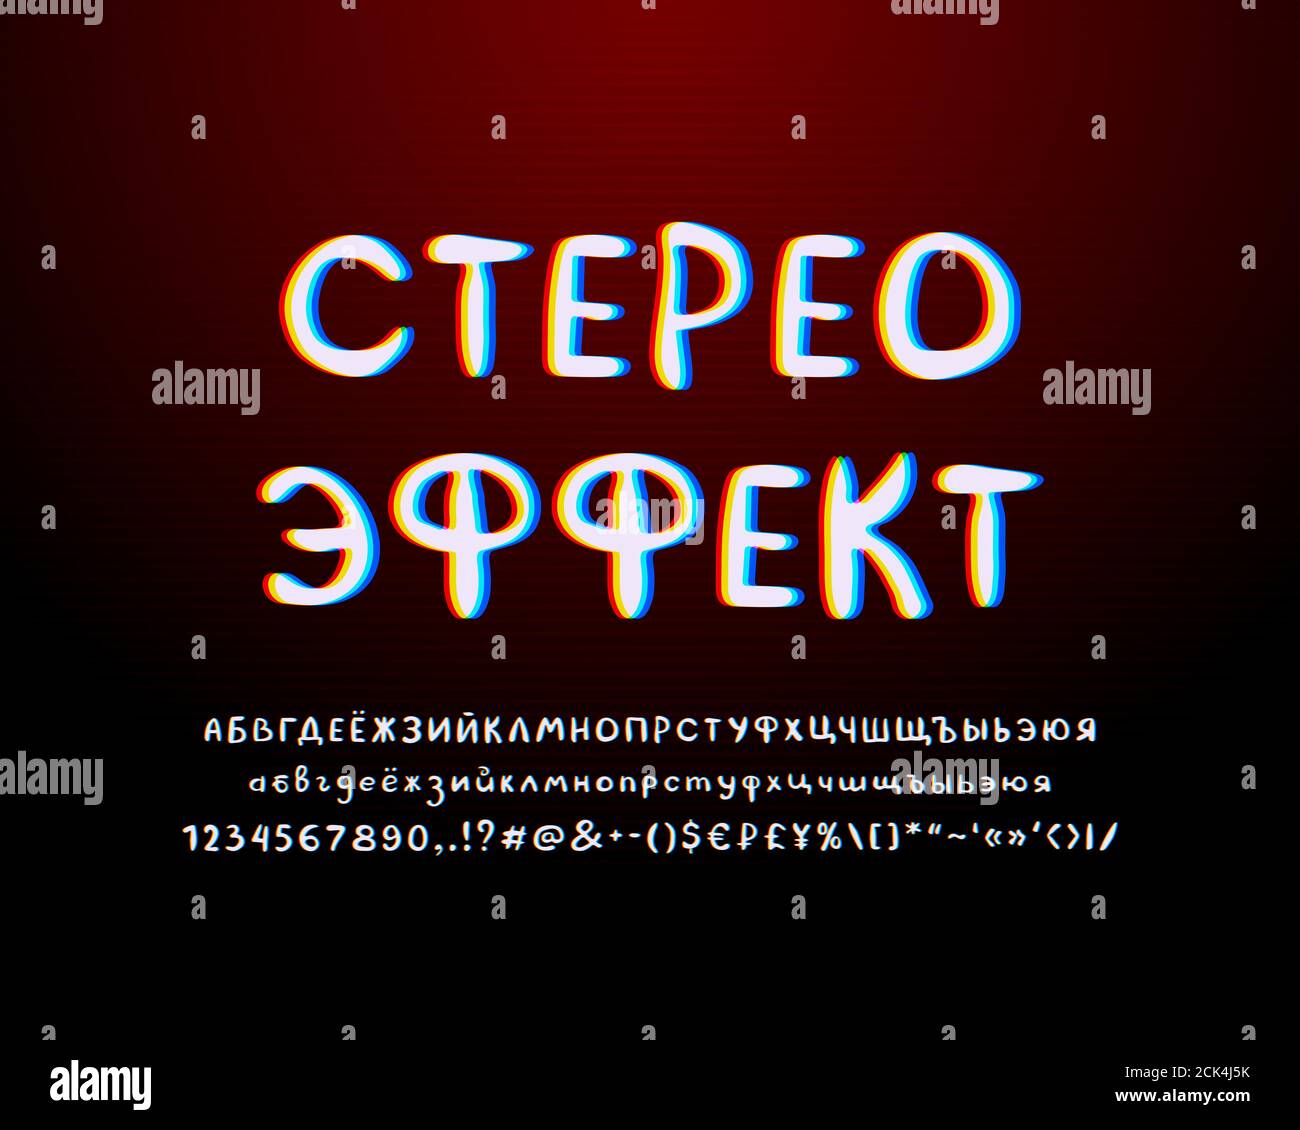 Abstract Cyrillic Alphabet. Stylized vector font, white, red, yellow, blue colors. Russian text Sterep effect. Stock Vector